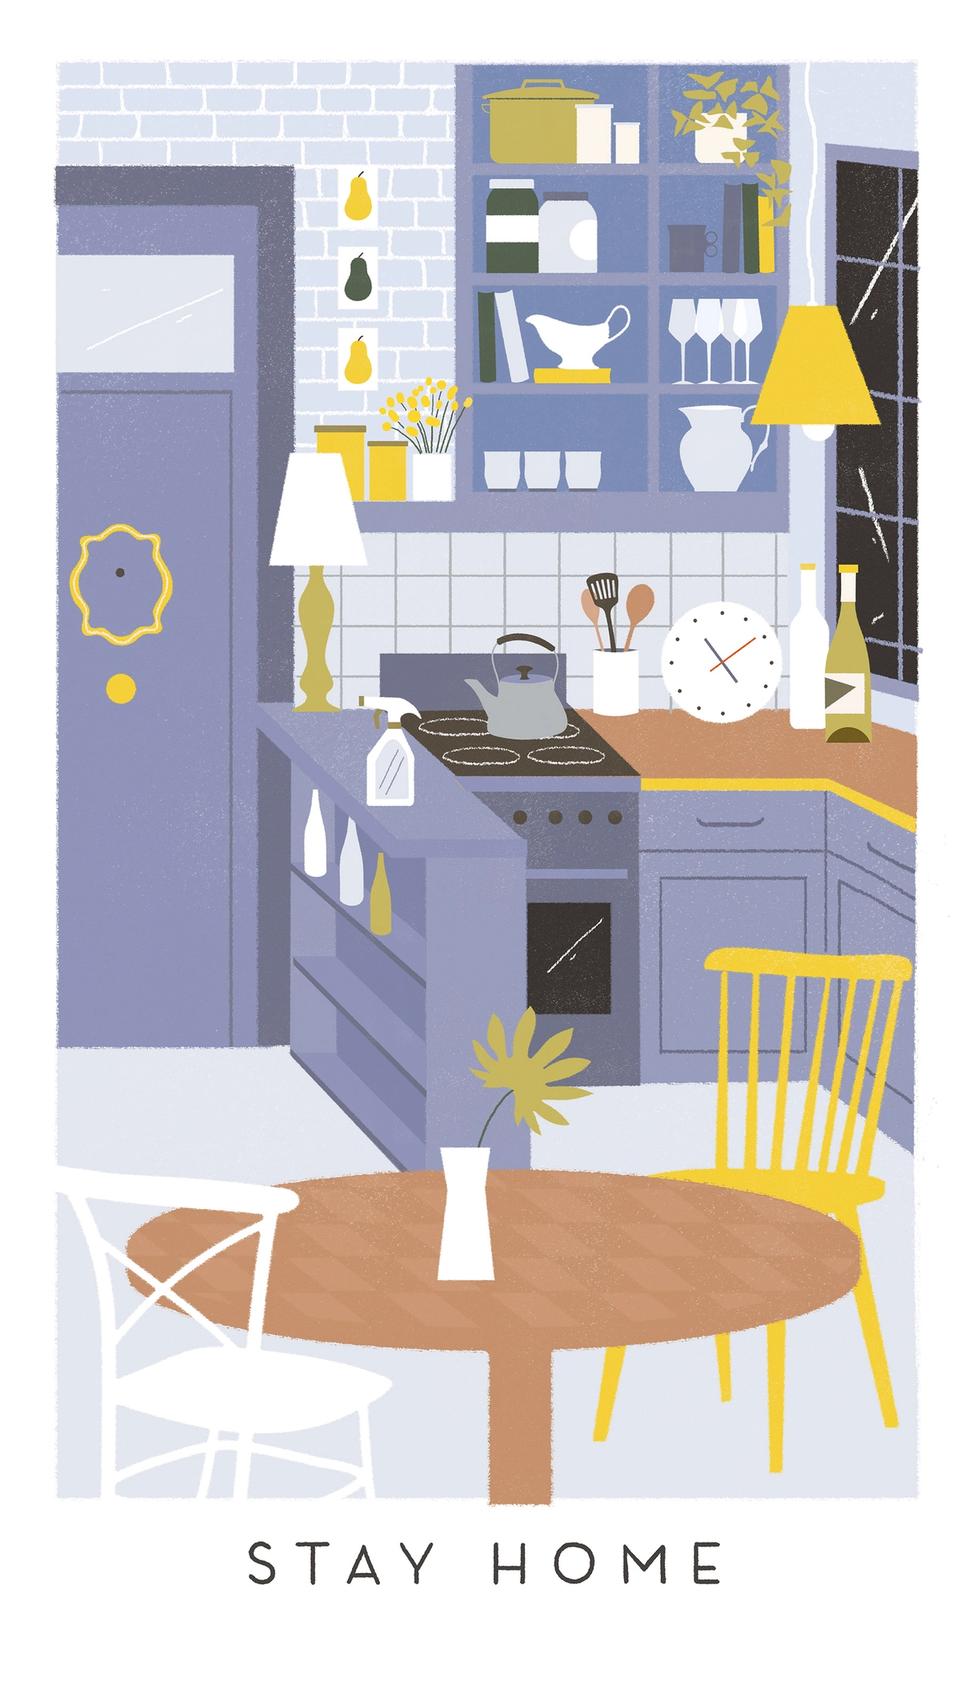 Illustration of Monica from Friends purple apartment kitchen and door